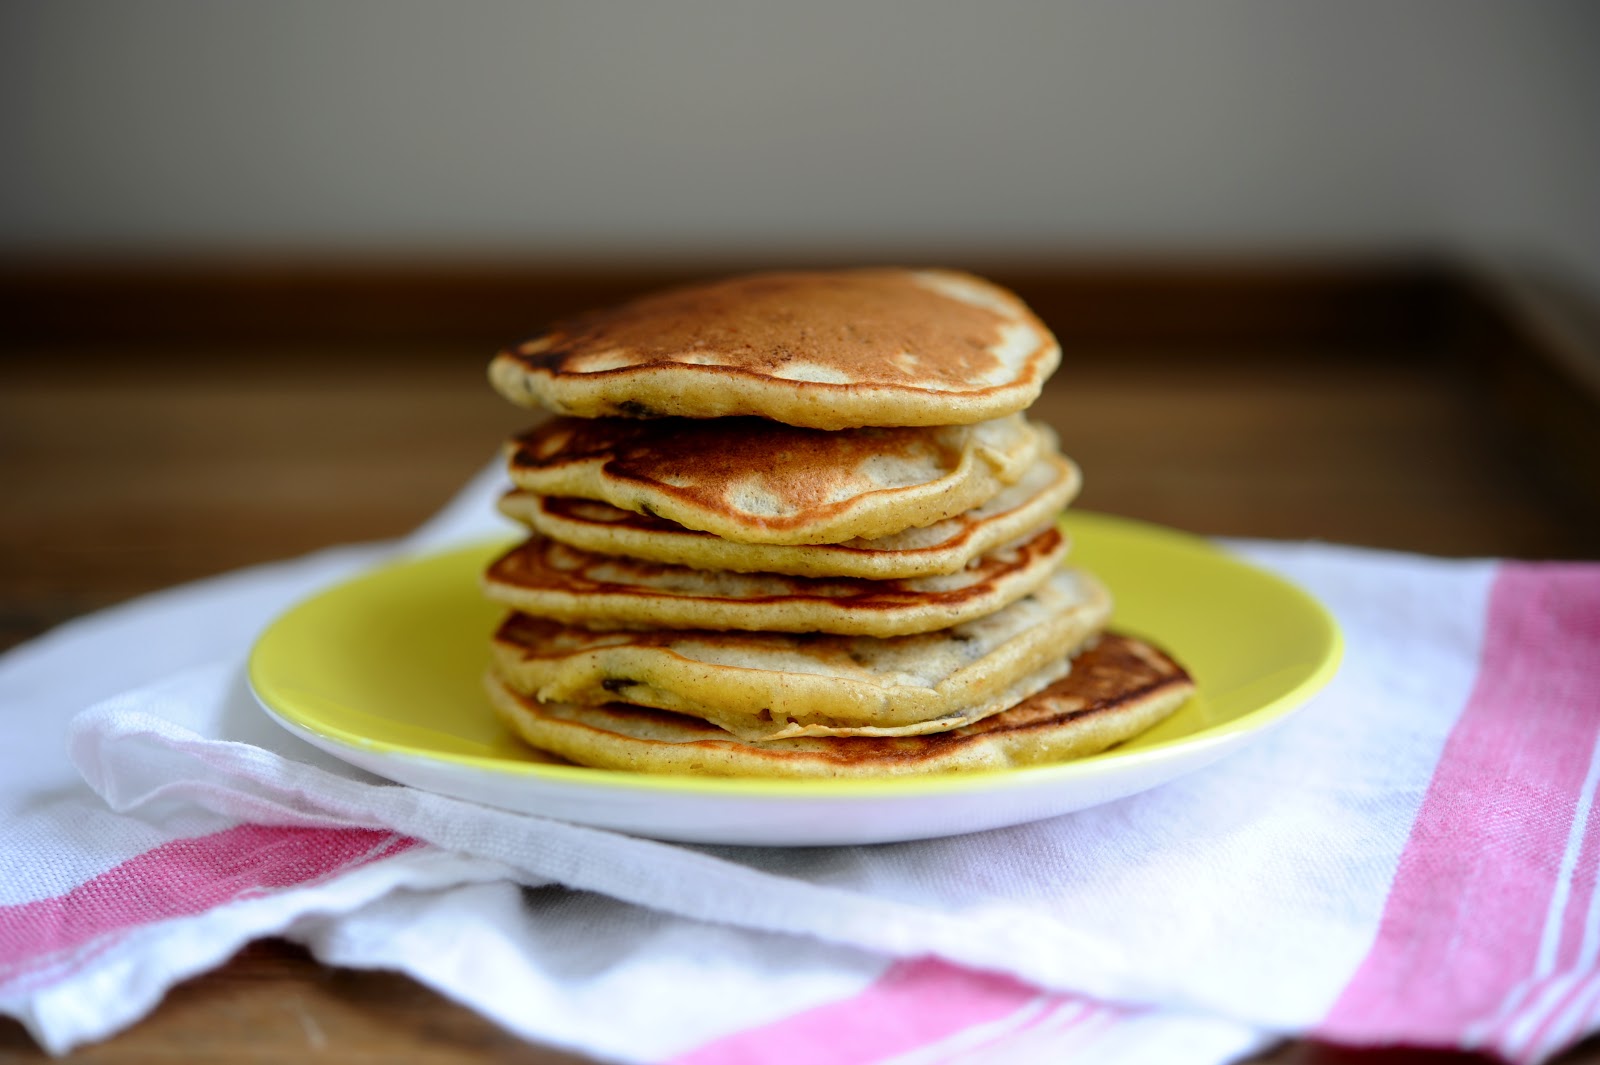 banana pancakes make how mama pancakes scratch you  chip makes do by from scratch: chocolate